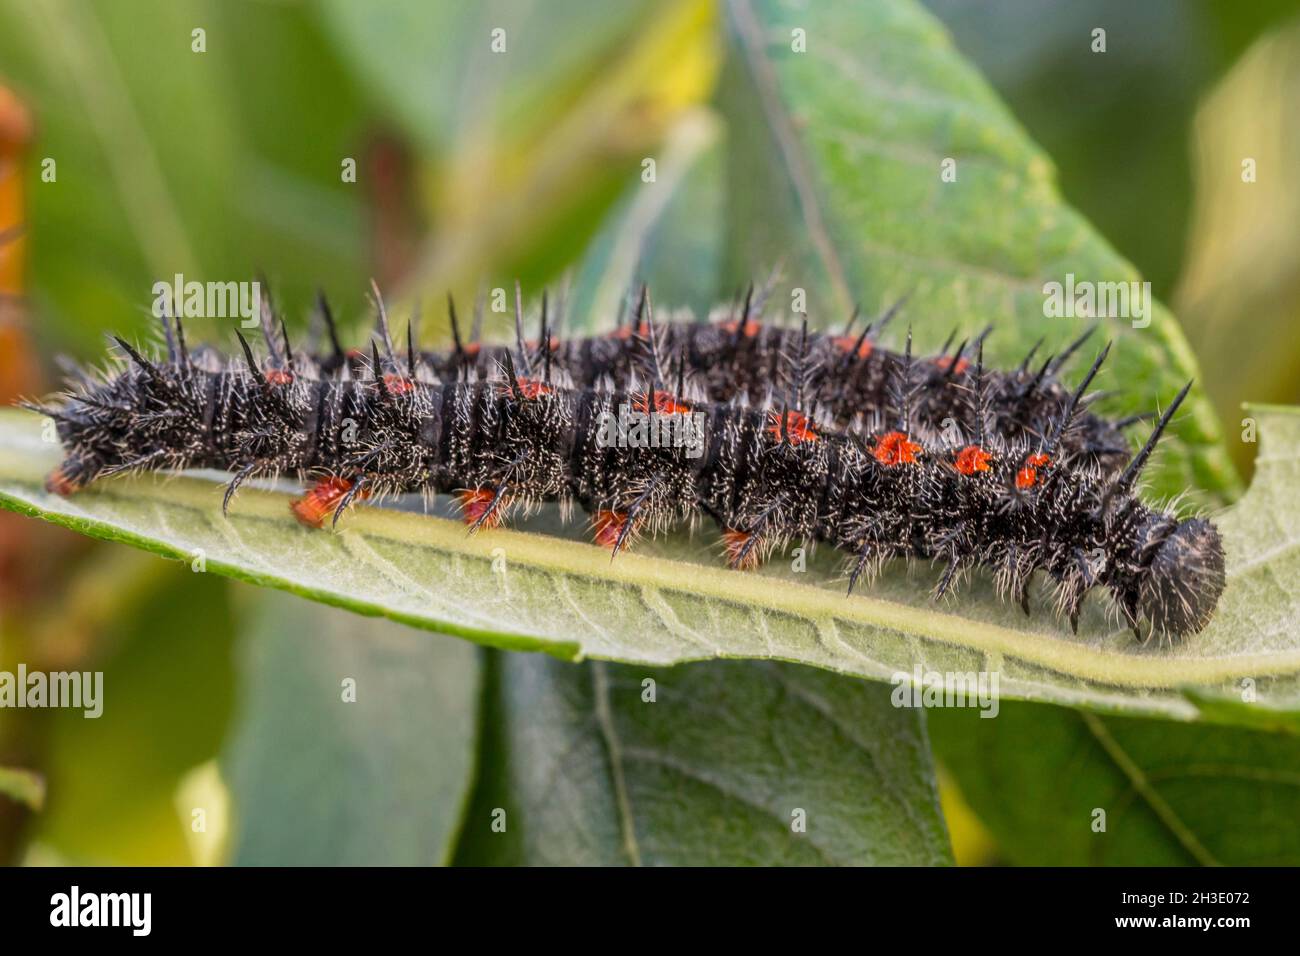 Camberwell beauty (Nymphalis antiopa), adult caterpillars sunbathing on a willow leaf, Germany Stock Photo